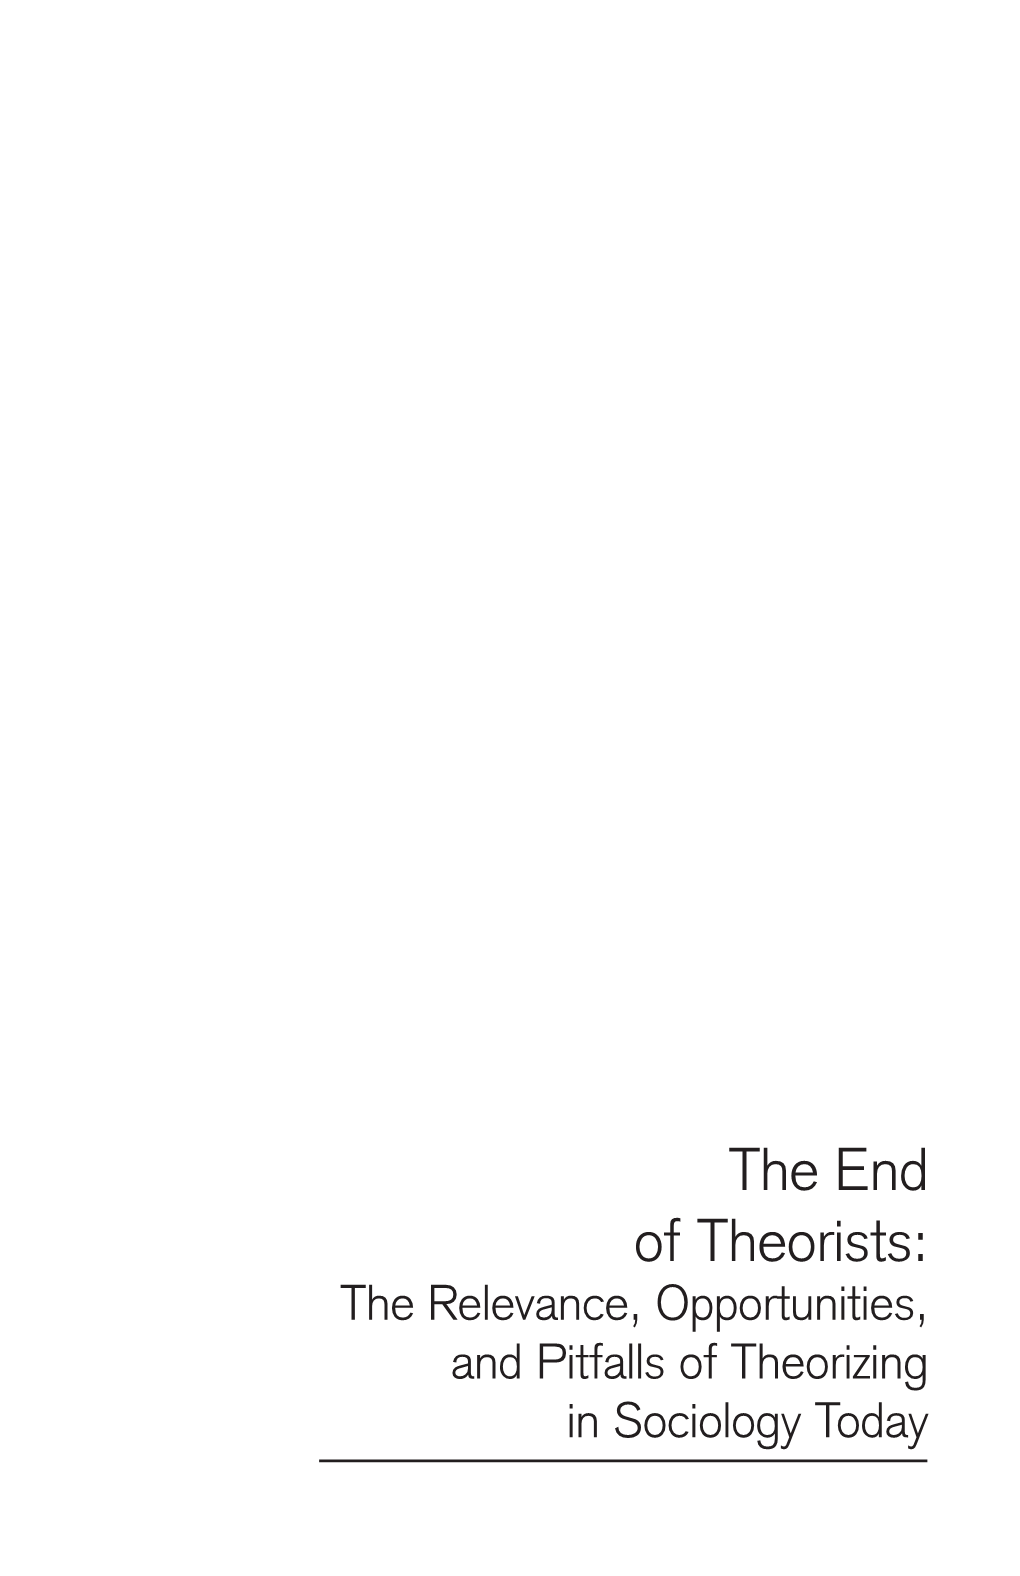 The End of Theorists: the Relevance, Opportunities, and Pitfalls Of